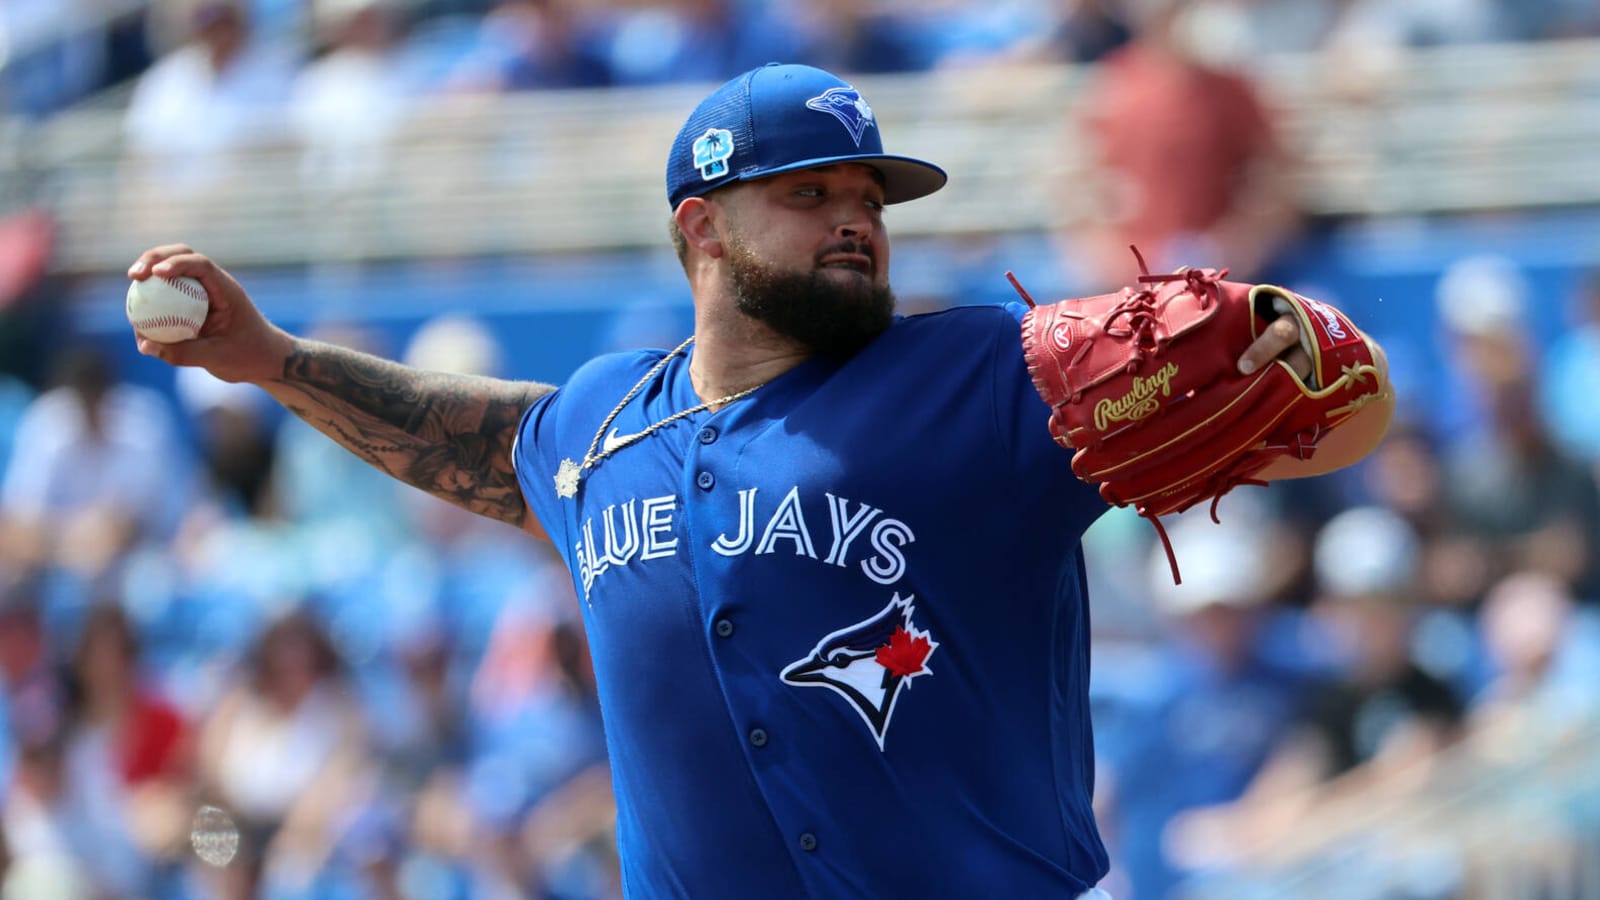 Blue Jays reportedly not close to extension with All-Star pitcher